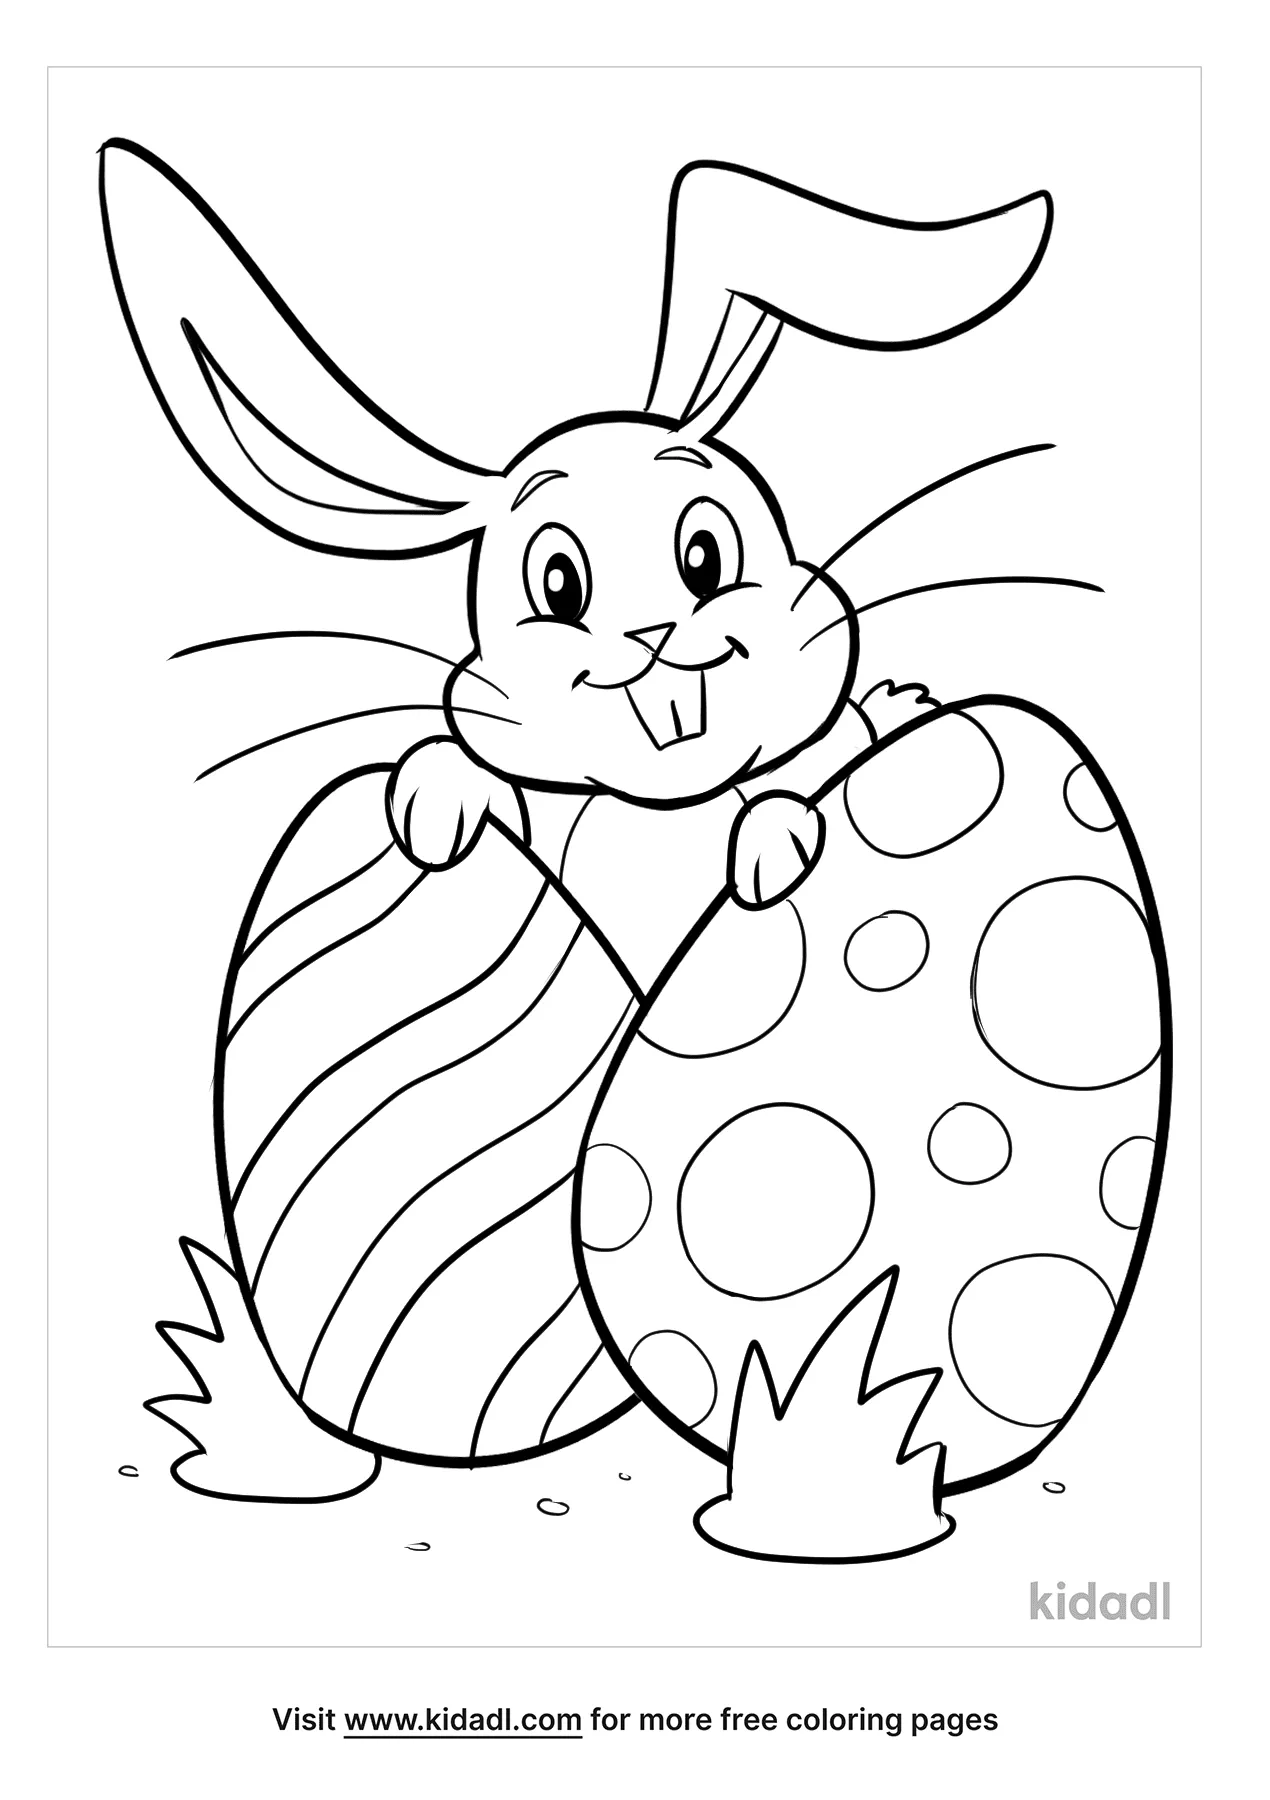 Easter Bunny Coloring Pages   Free Easter Coloring Pages   Kidadl